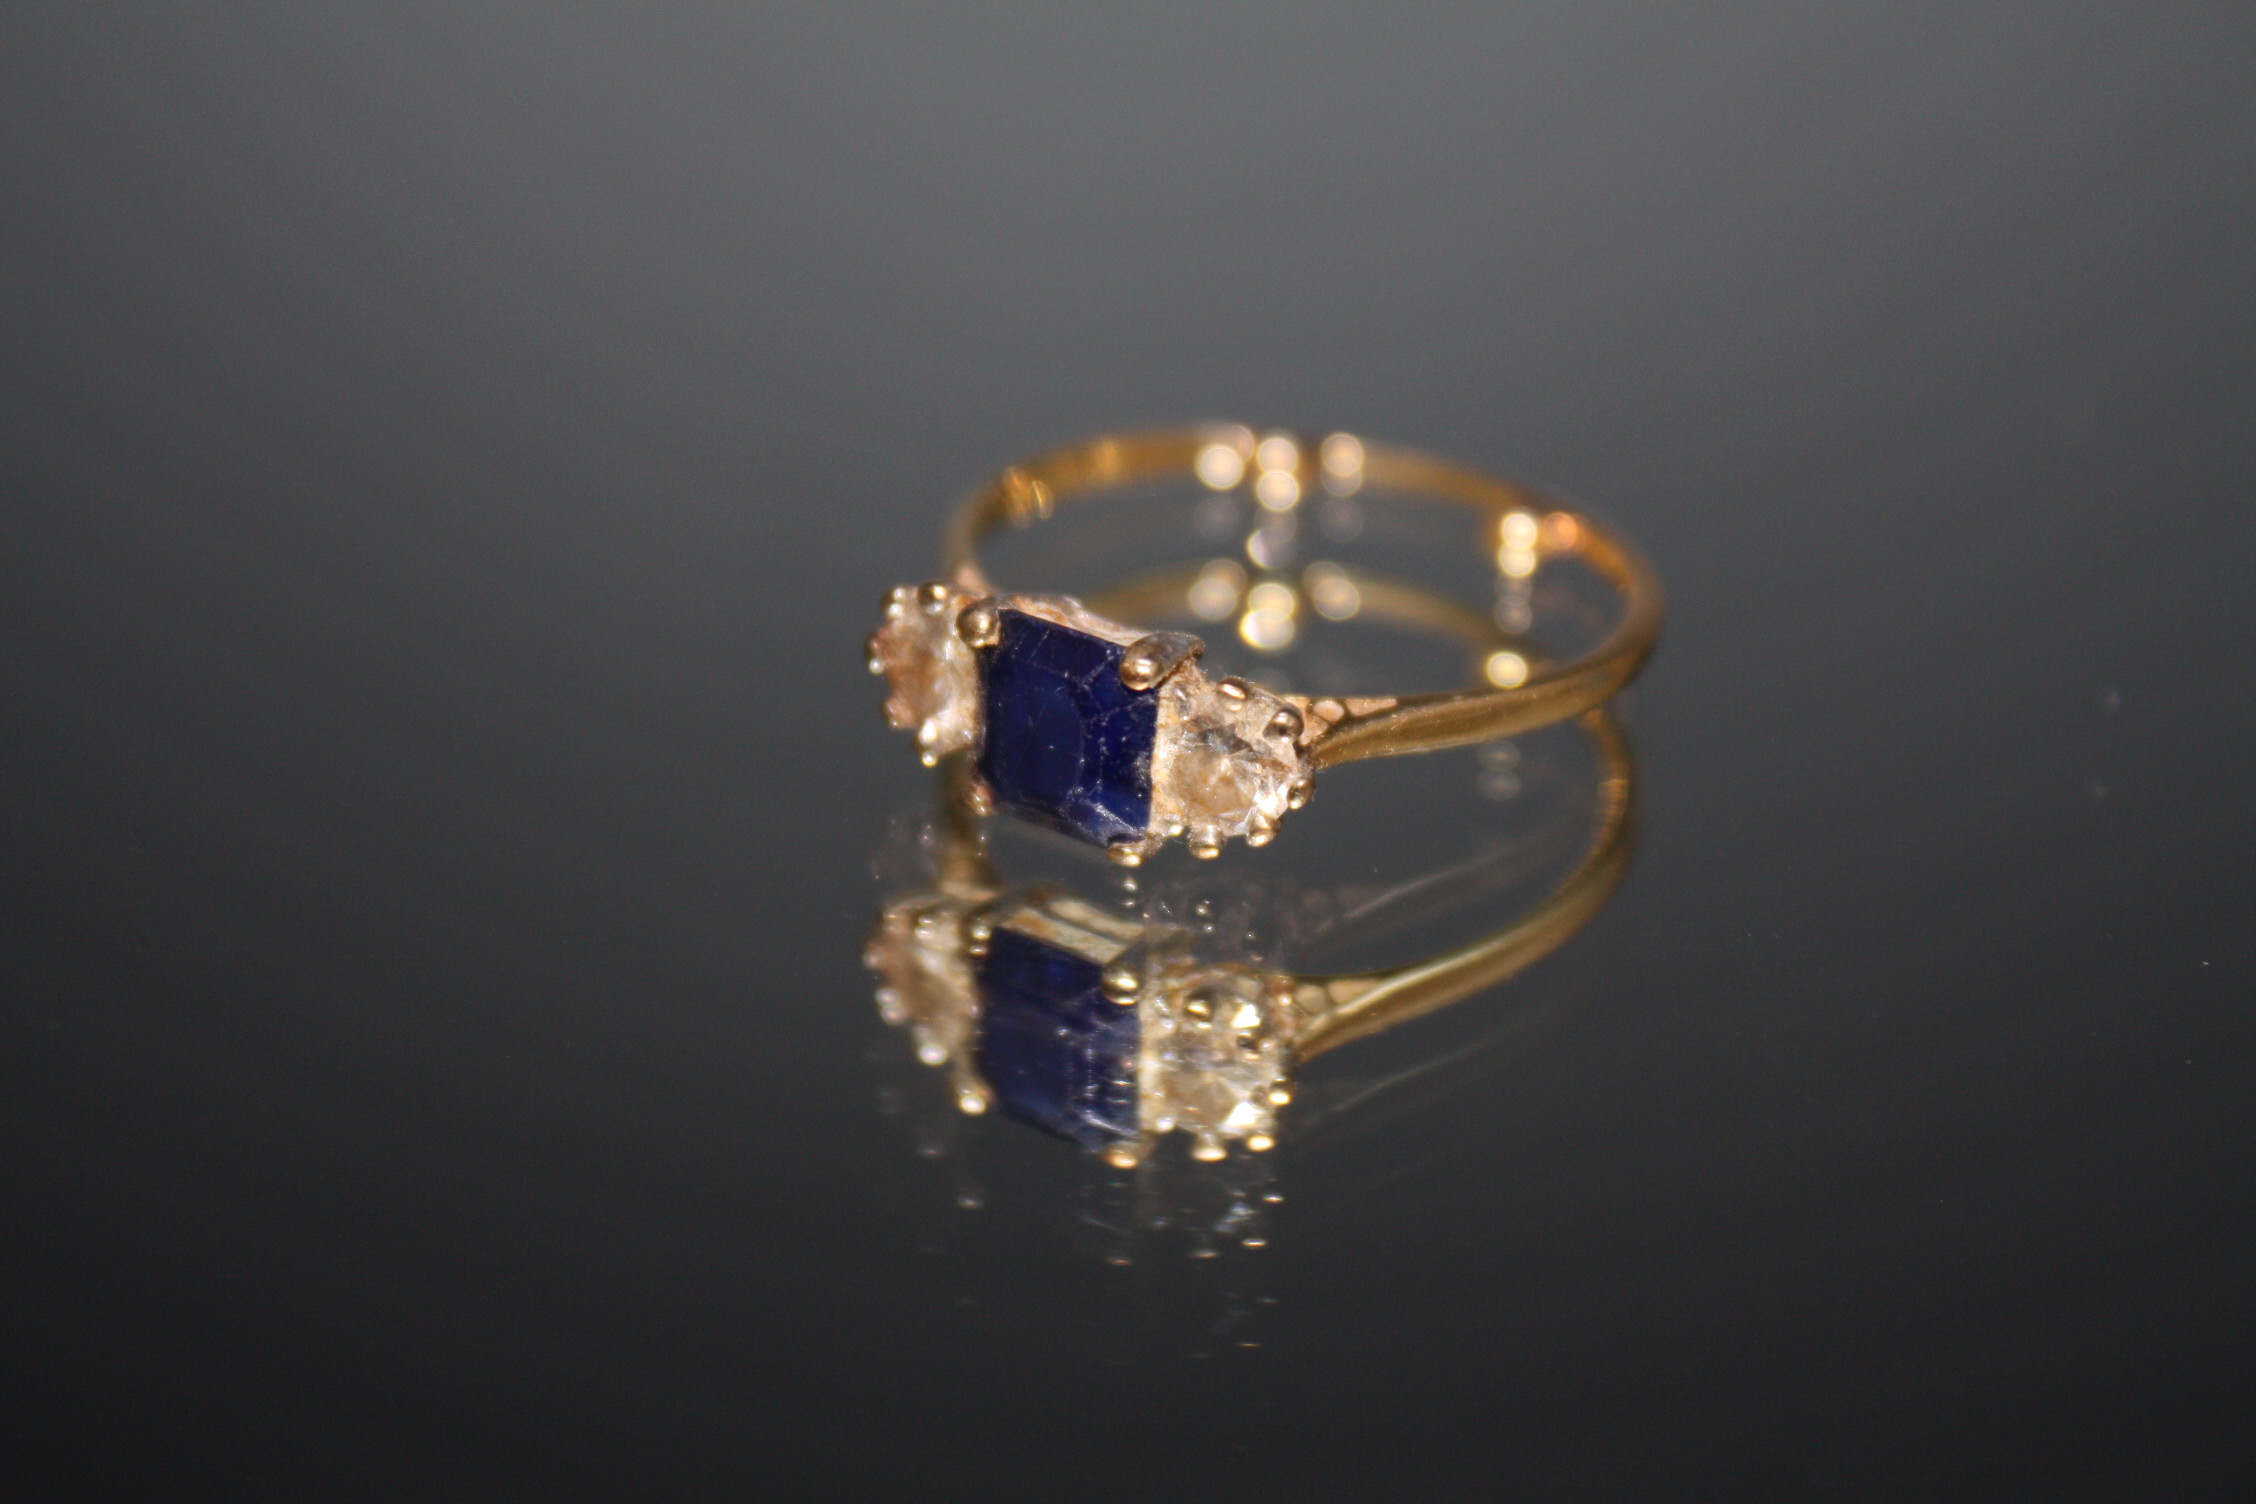 A THREE STONE SAPPHIRE AND DIAMOND RING, set in unmarked yellow metal, each diamond being an - Image 2 of 2